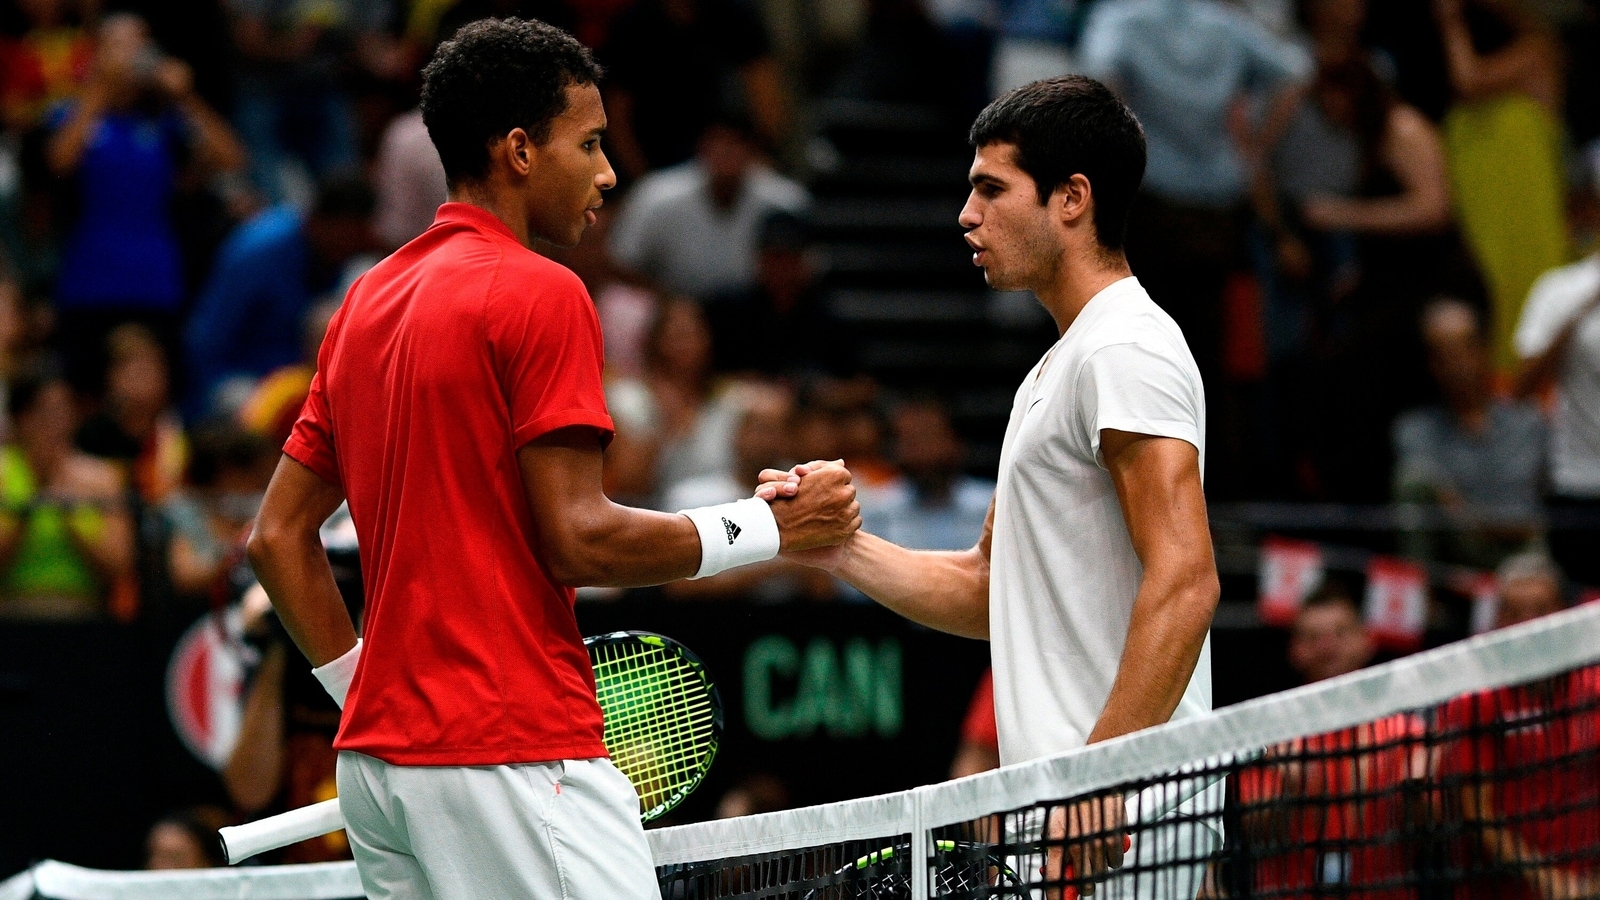 davis-cup-carlos-alcaraz-loses-to-felix-auger-aliassime-in-first-match-as-world-no-1